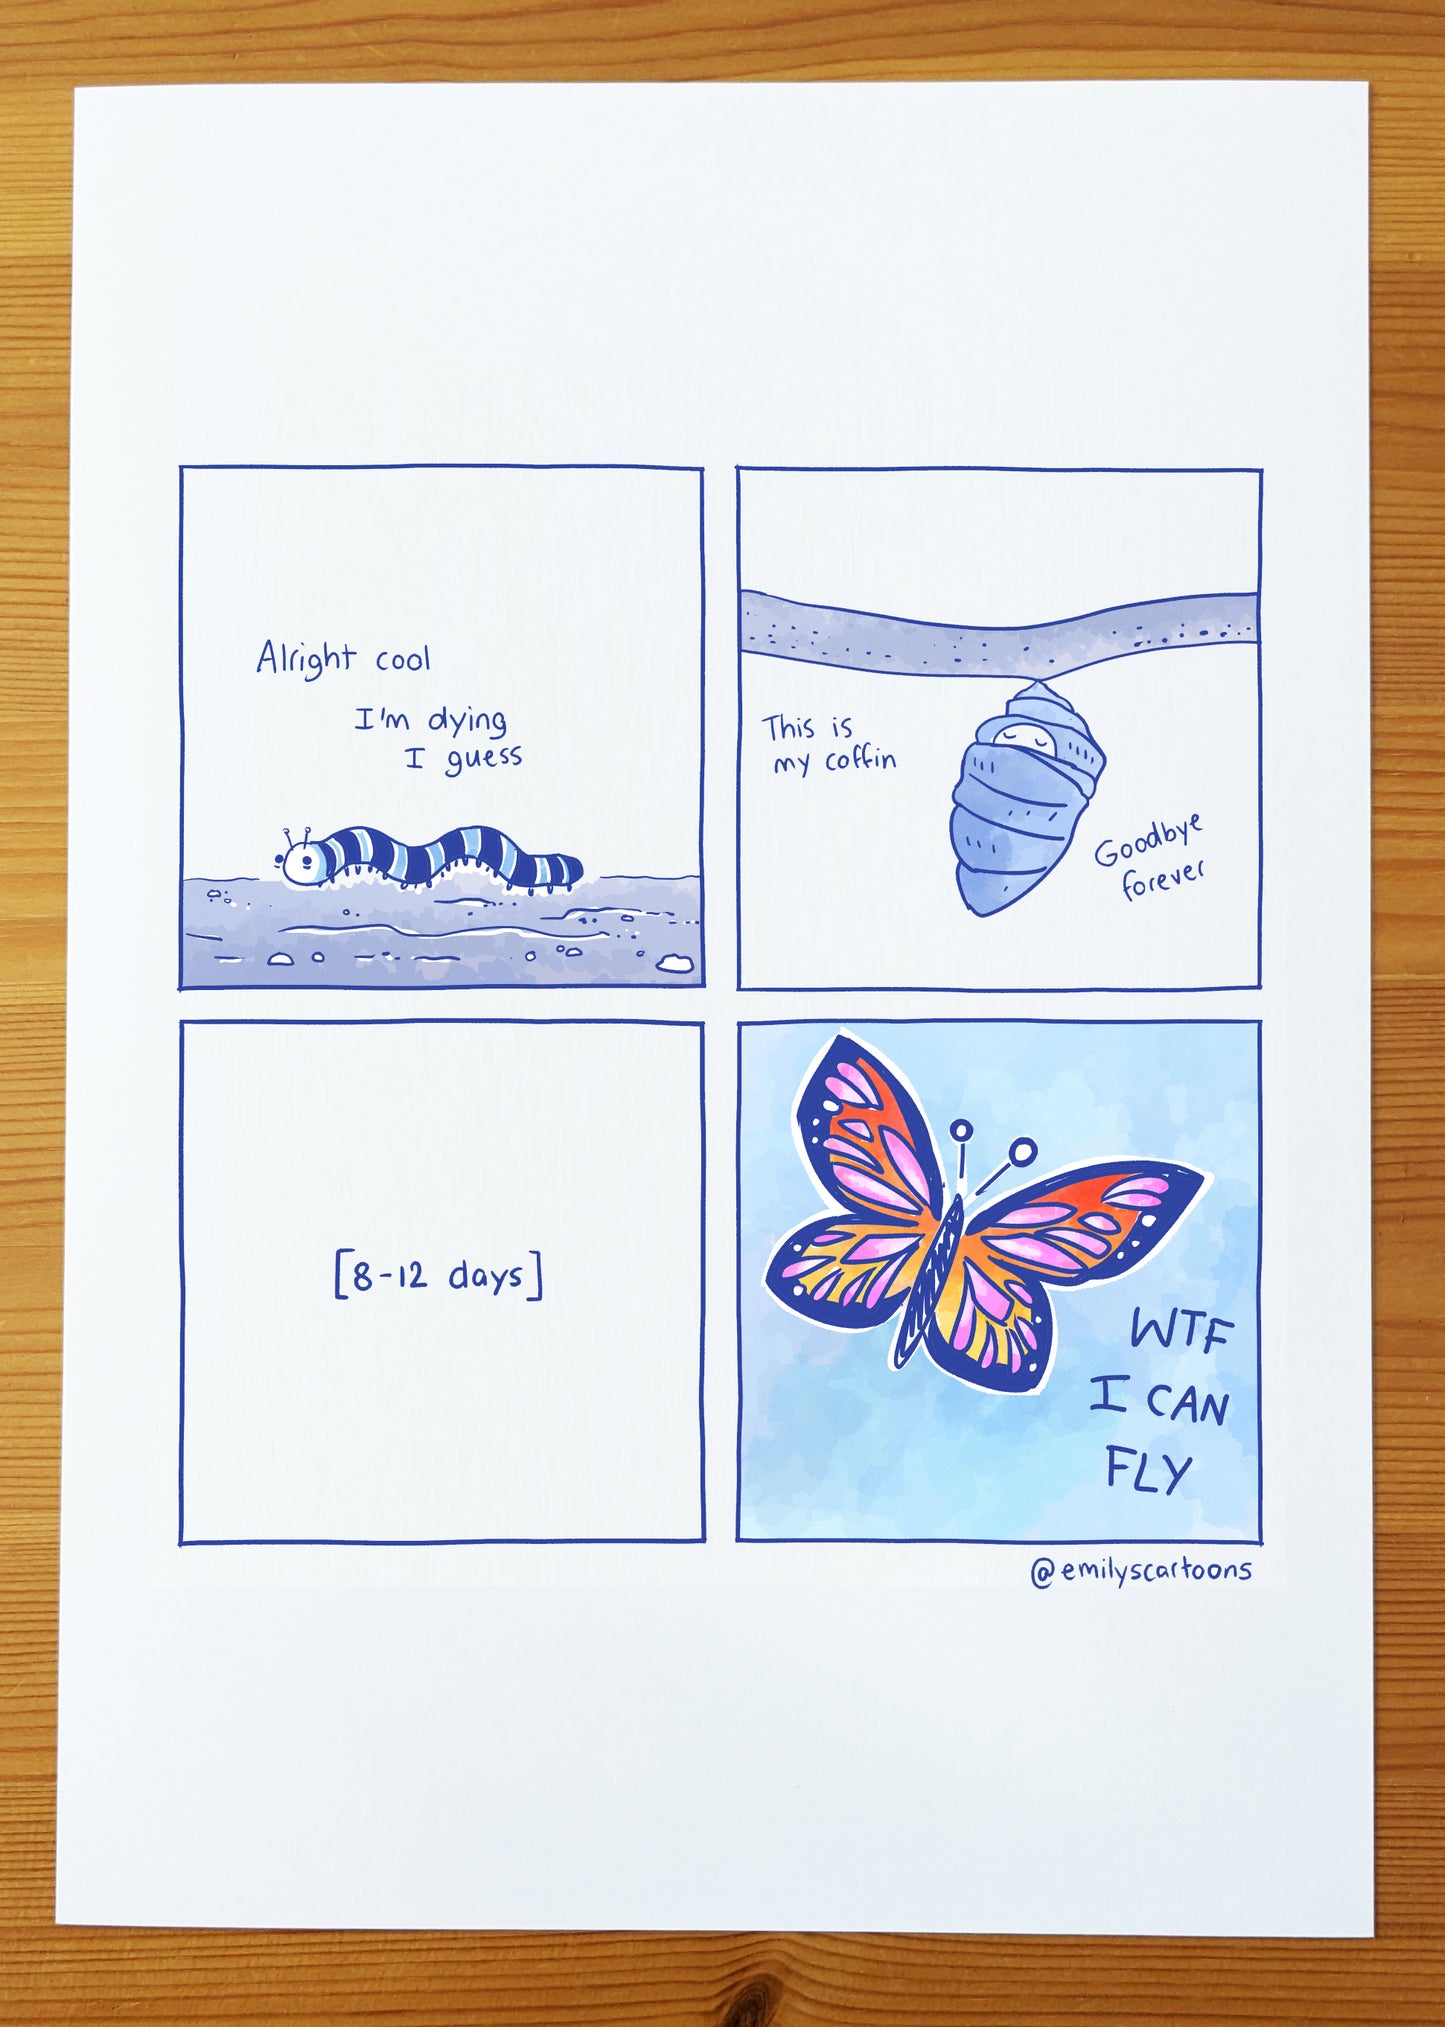 Butterfly - High quality A4 print